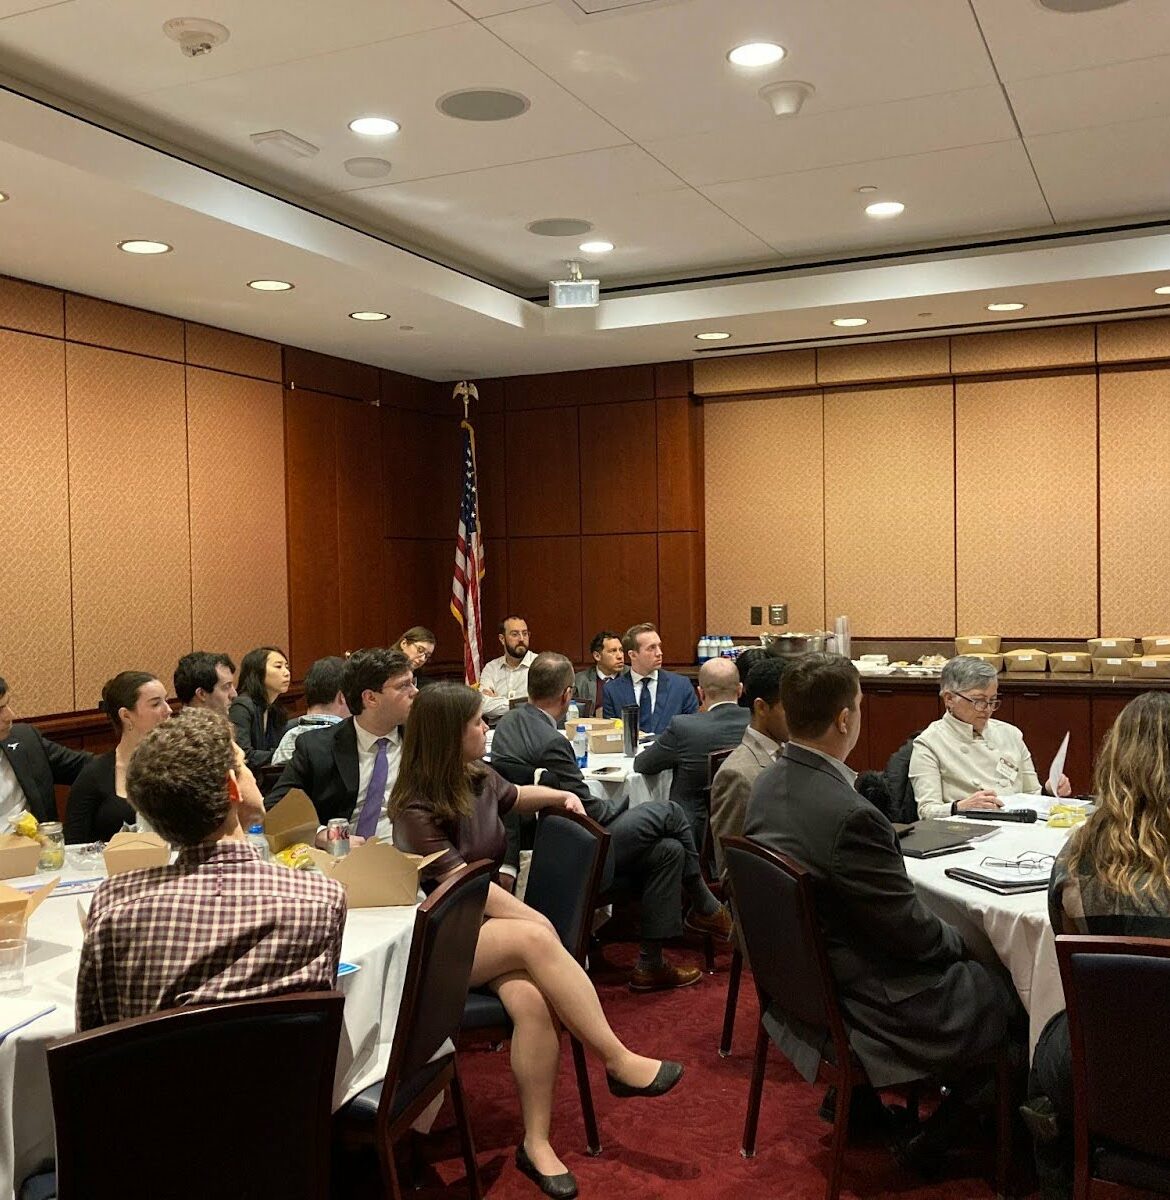 A group of people in formal business attire sits in a conference room listening to a member of the roundtable speak